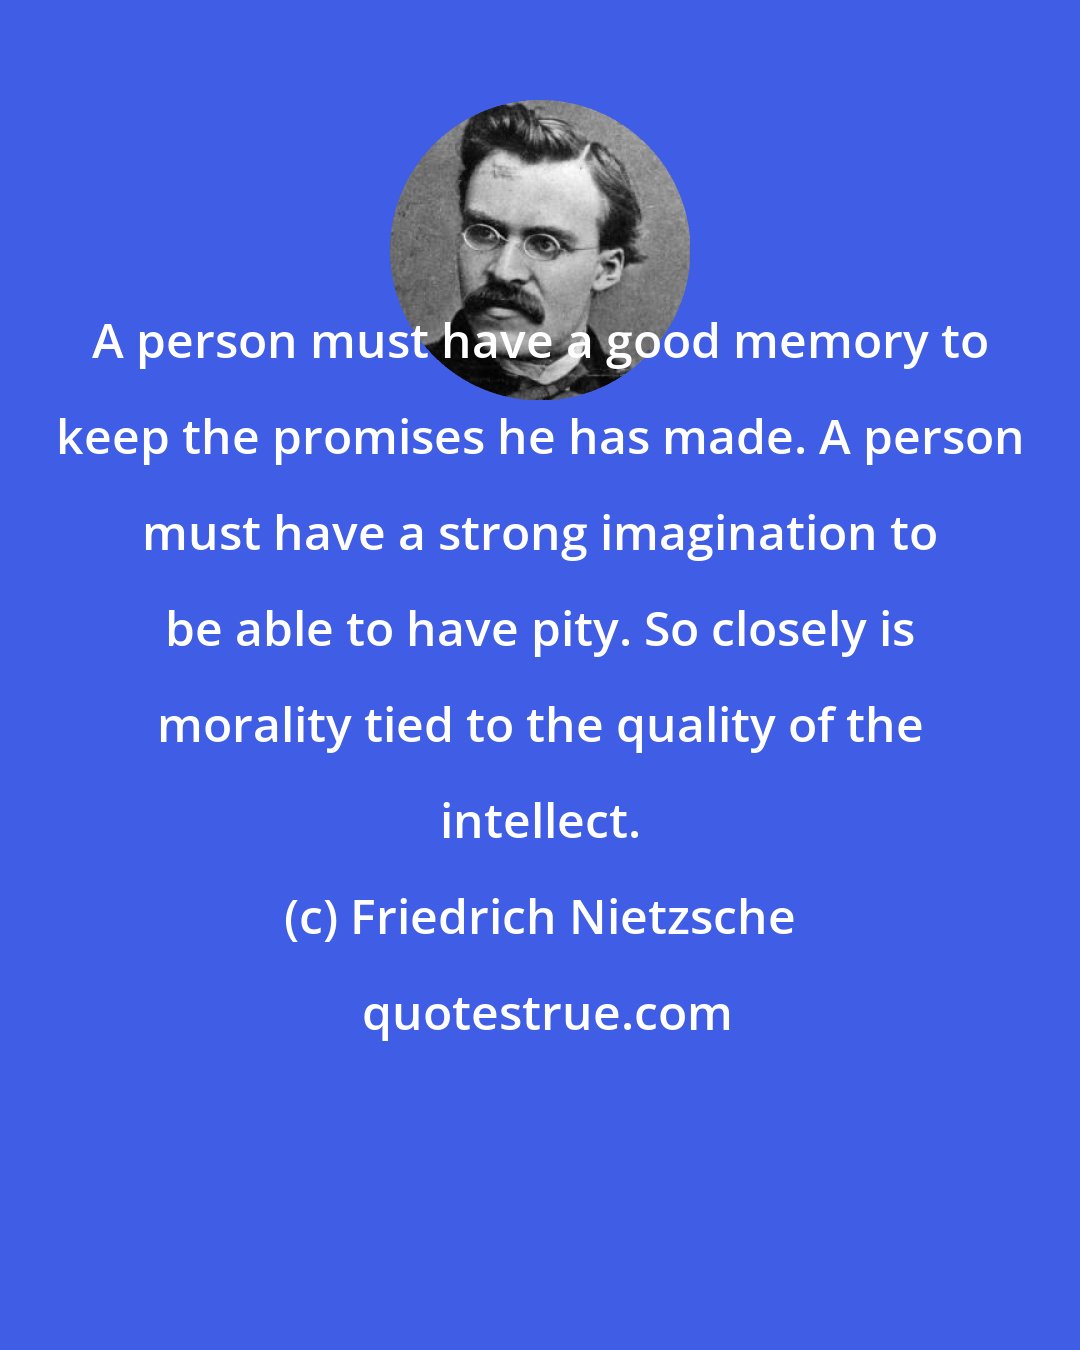 Friedrich Nietzsche: A person must have a good memory to keep the promises he has made. A person must have a strong imagination to be able to have pity. So closely is morality tied to the quality of the intellect.